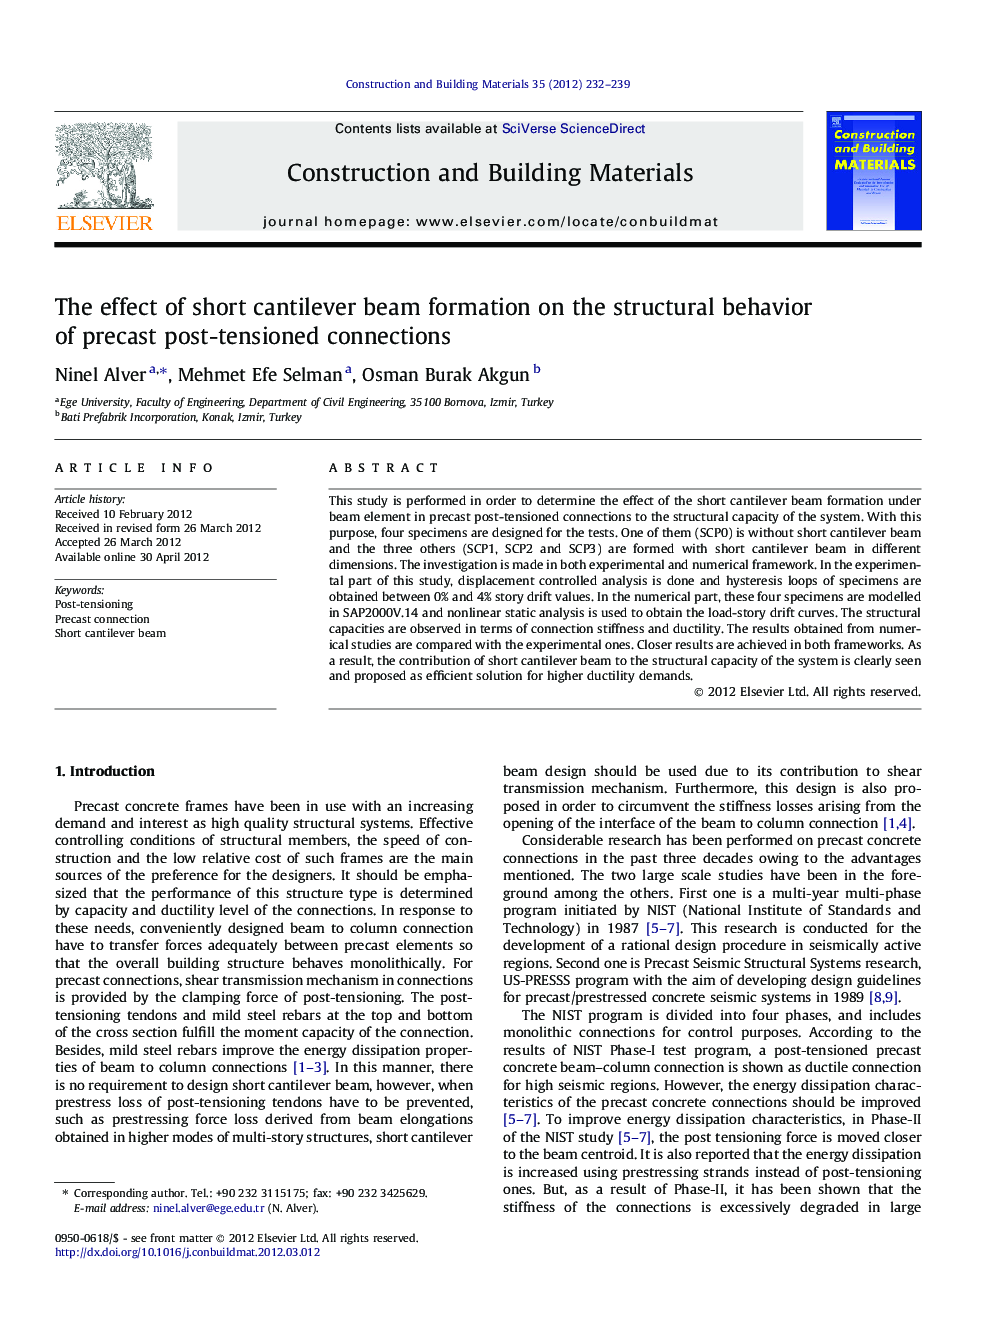 The effect of short cantilever beam formation on the structural behavior of precast post-tensioned connections